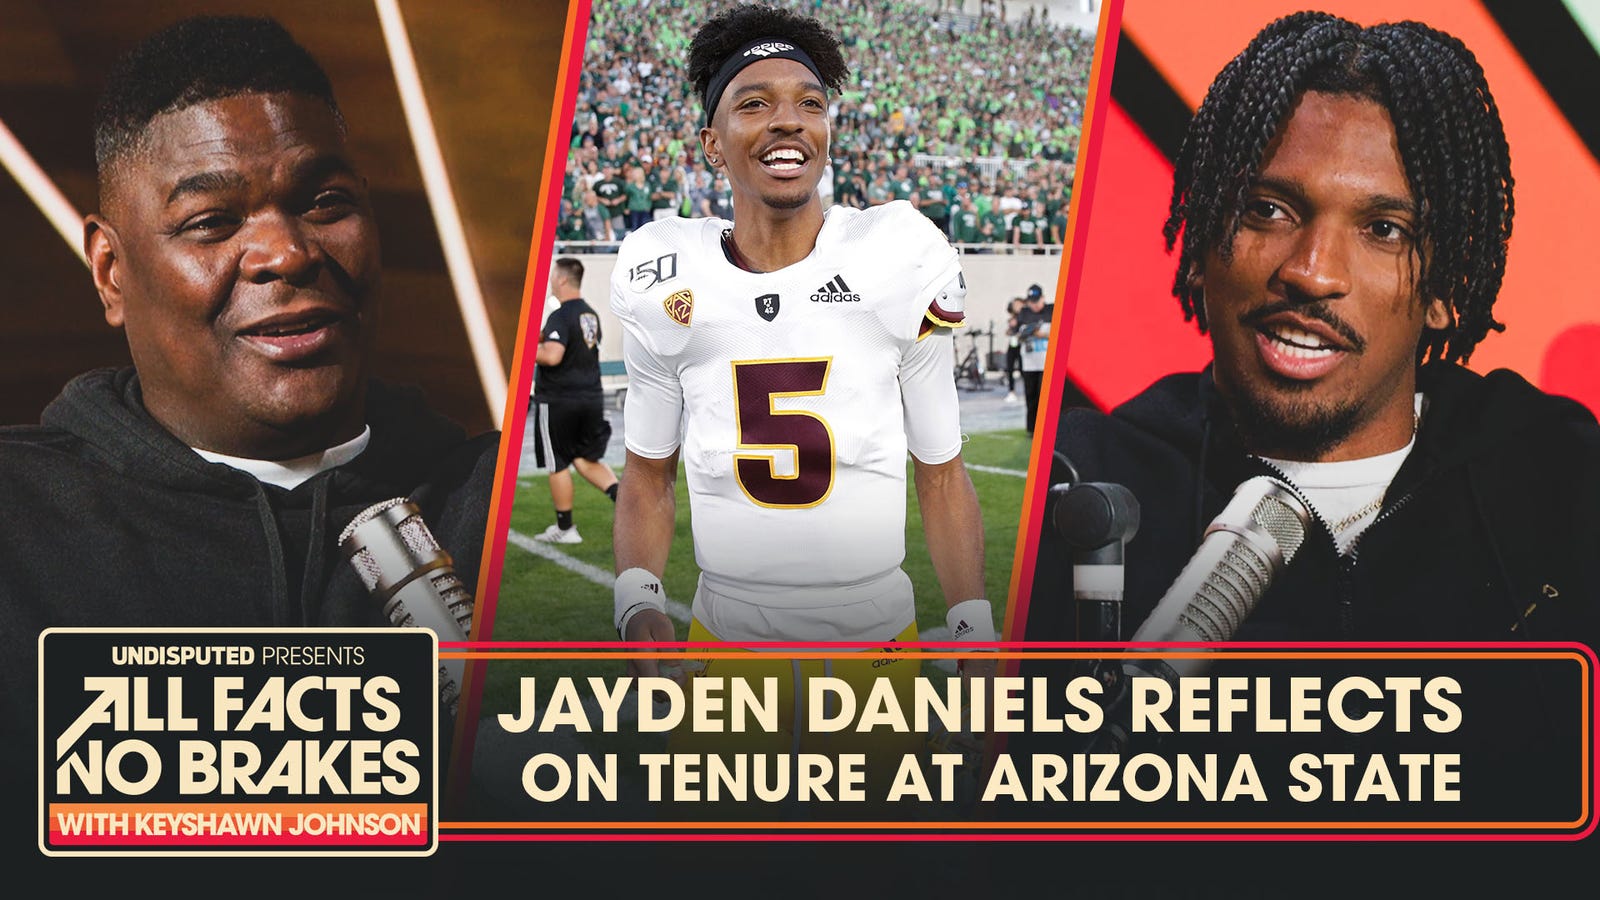 Jayden Daniels' Arizona State teammates trashed him in viral online video | All Facts No Brakes